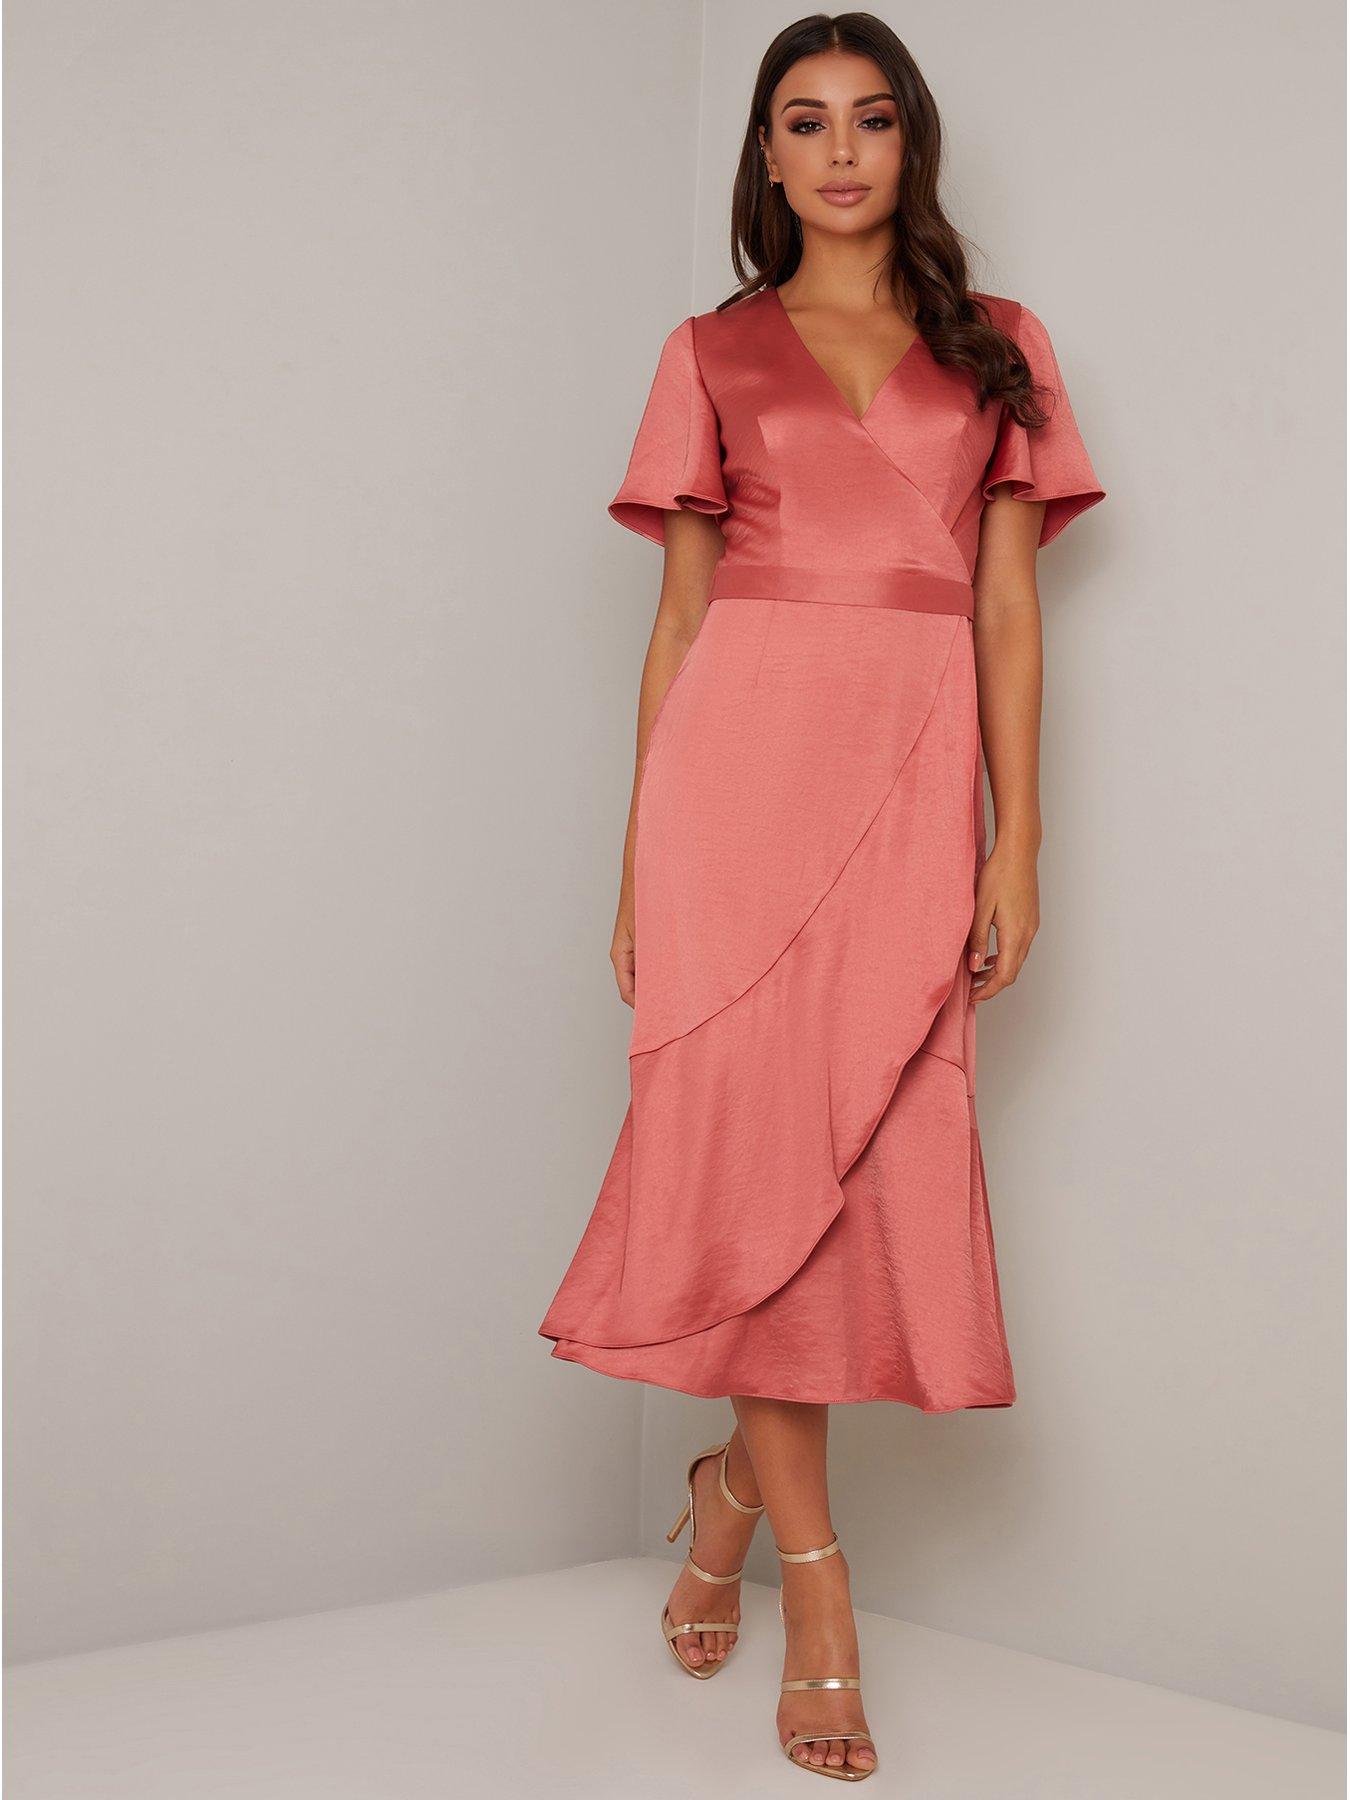 littlewoods occasion dresses